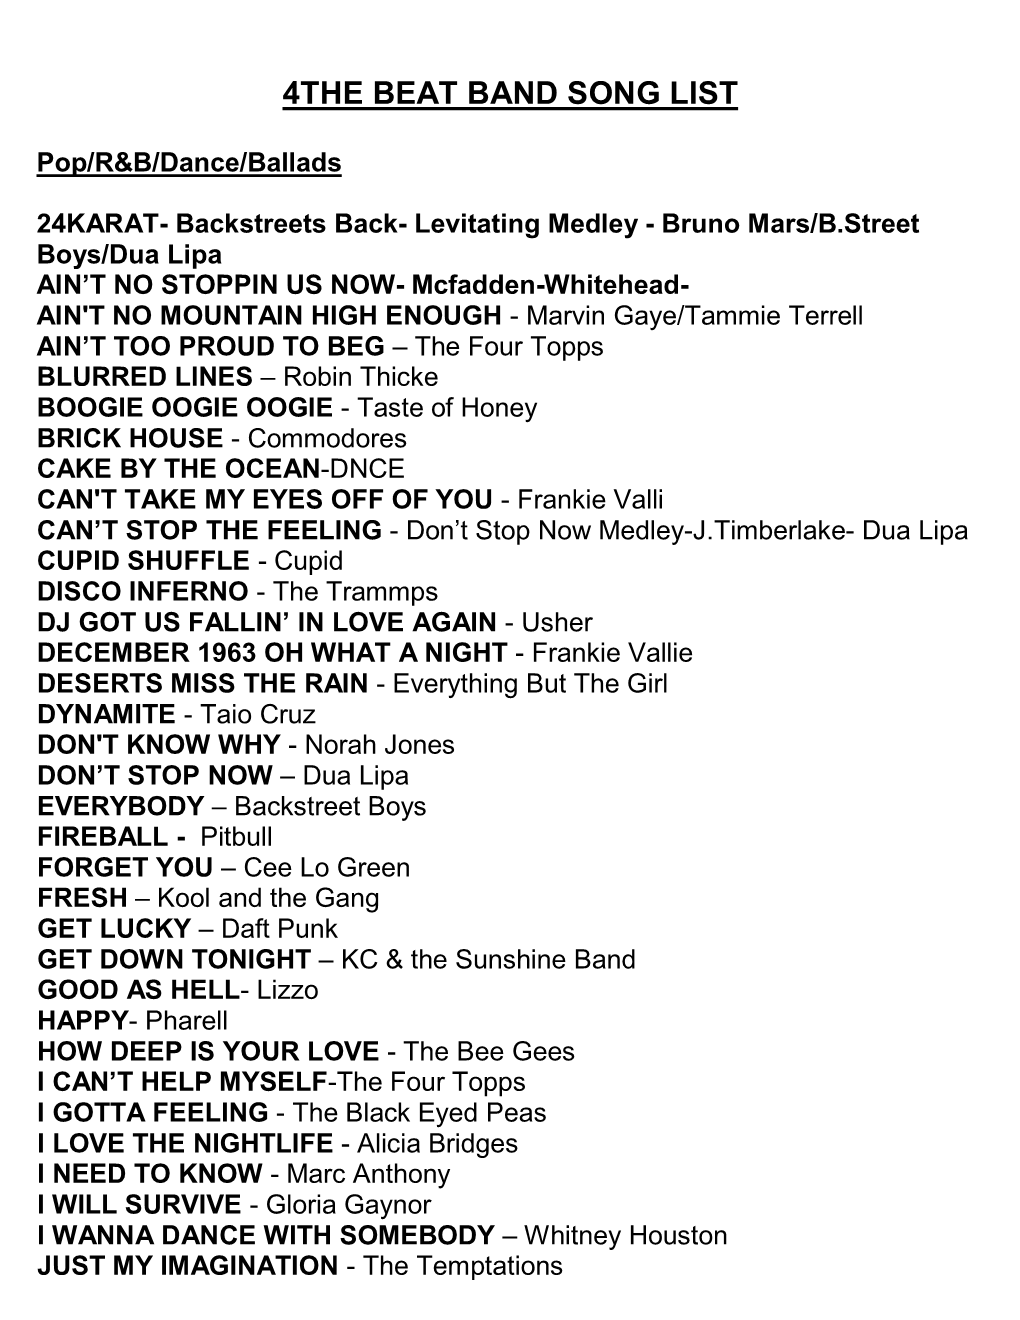 4The Beat Band Song List